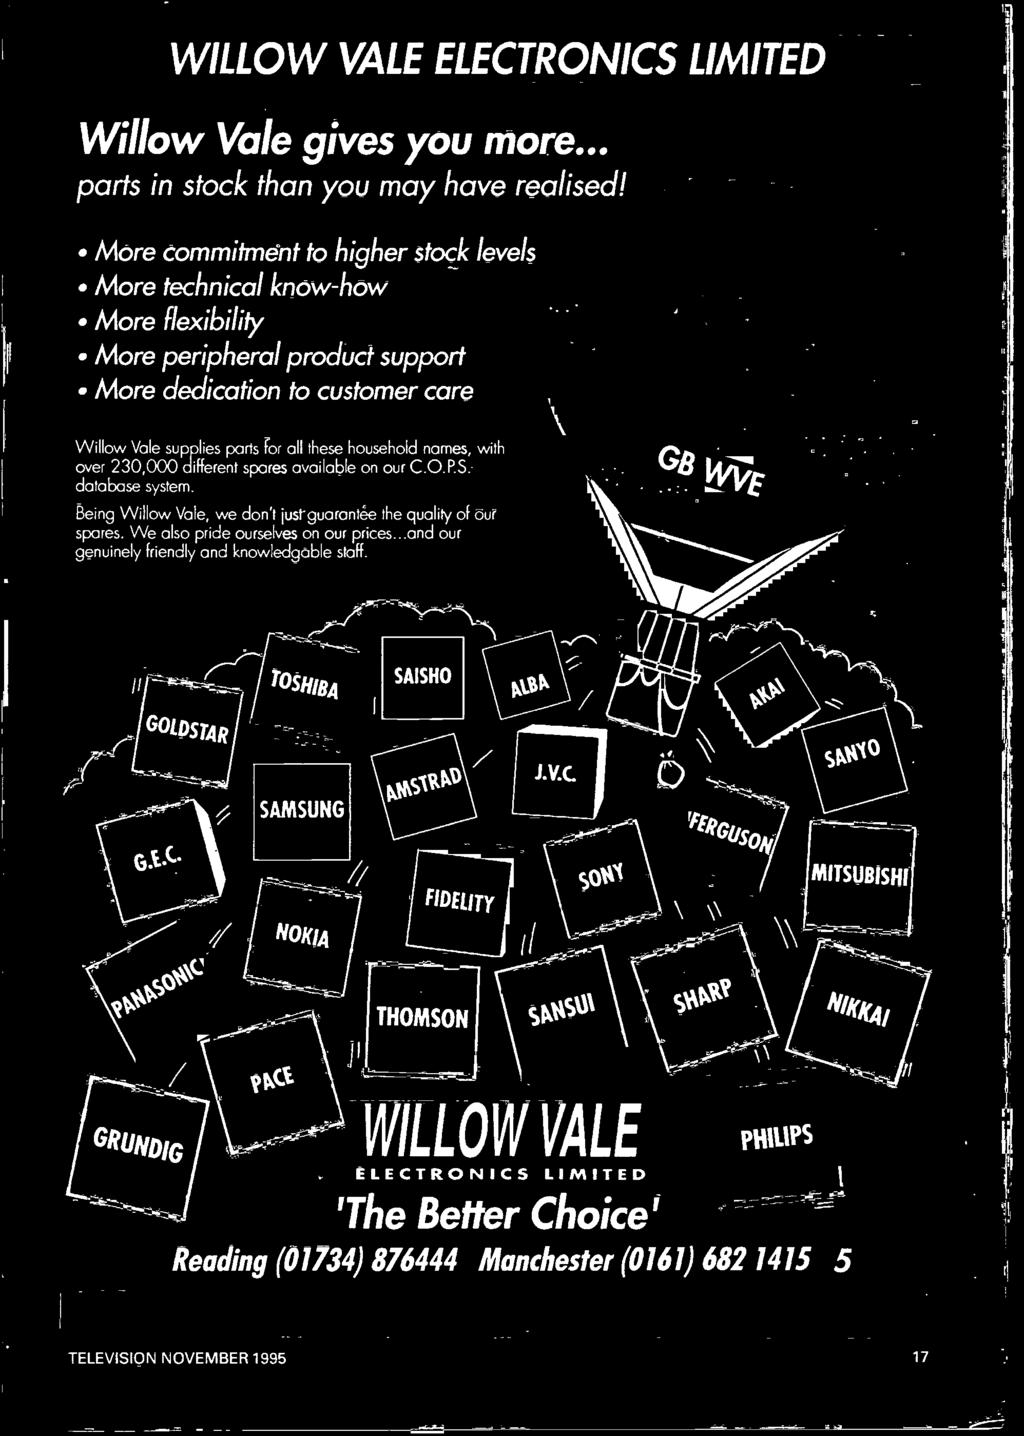 Being Willow Vale, we don't just -guarantee the quality of our spares. We also pride ourselves on our prices.